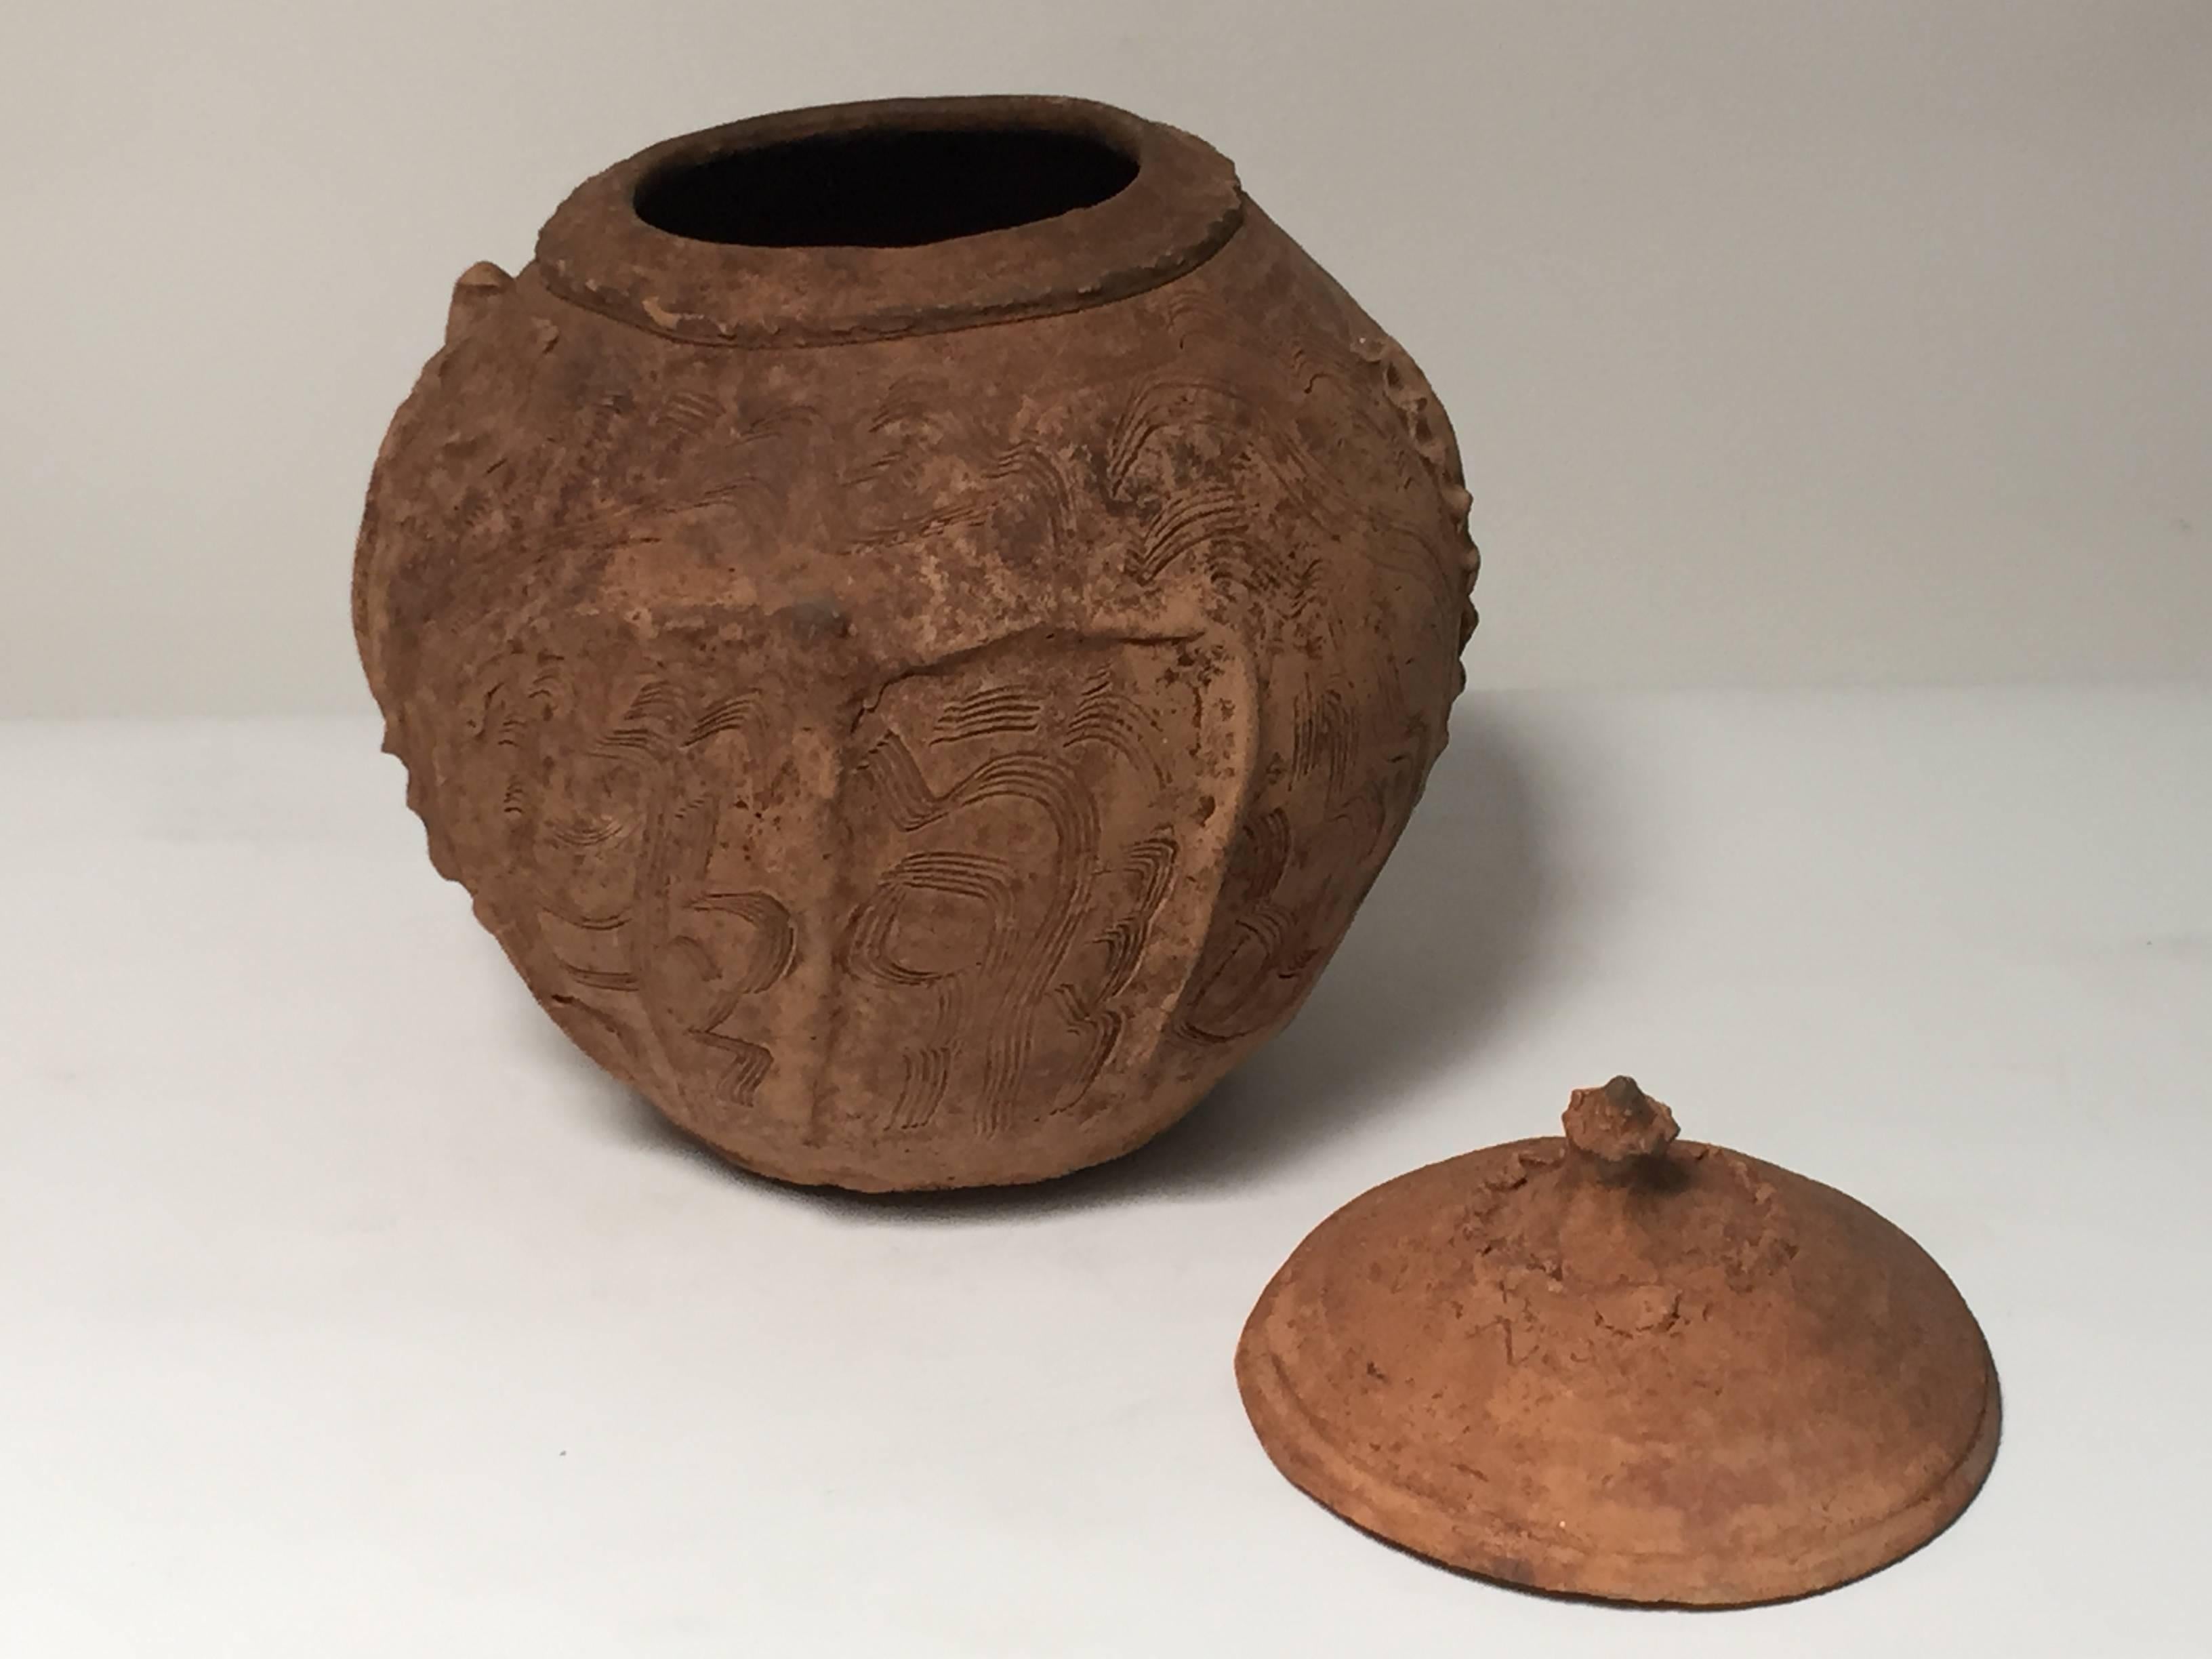 This ancient pottery vessel is decorated with four lotus shaped leafs that surround the jar. The clay body is orange and rust colored.
These vessels once held actual offerings, most likely food items.
 